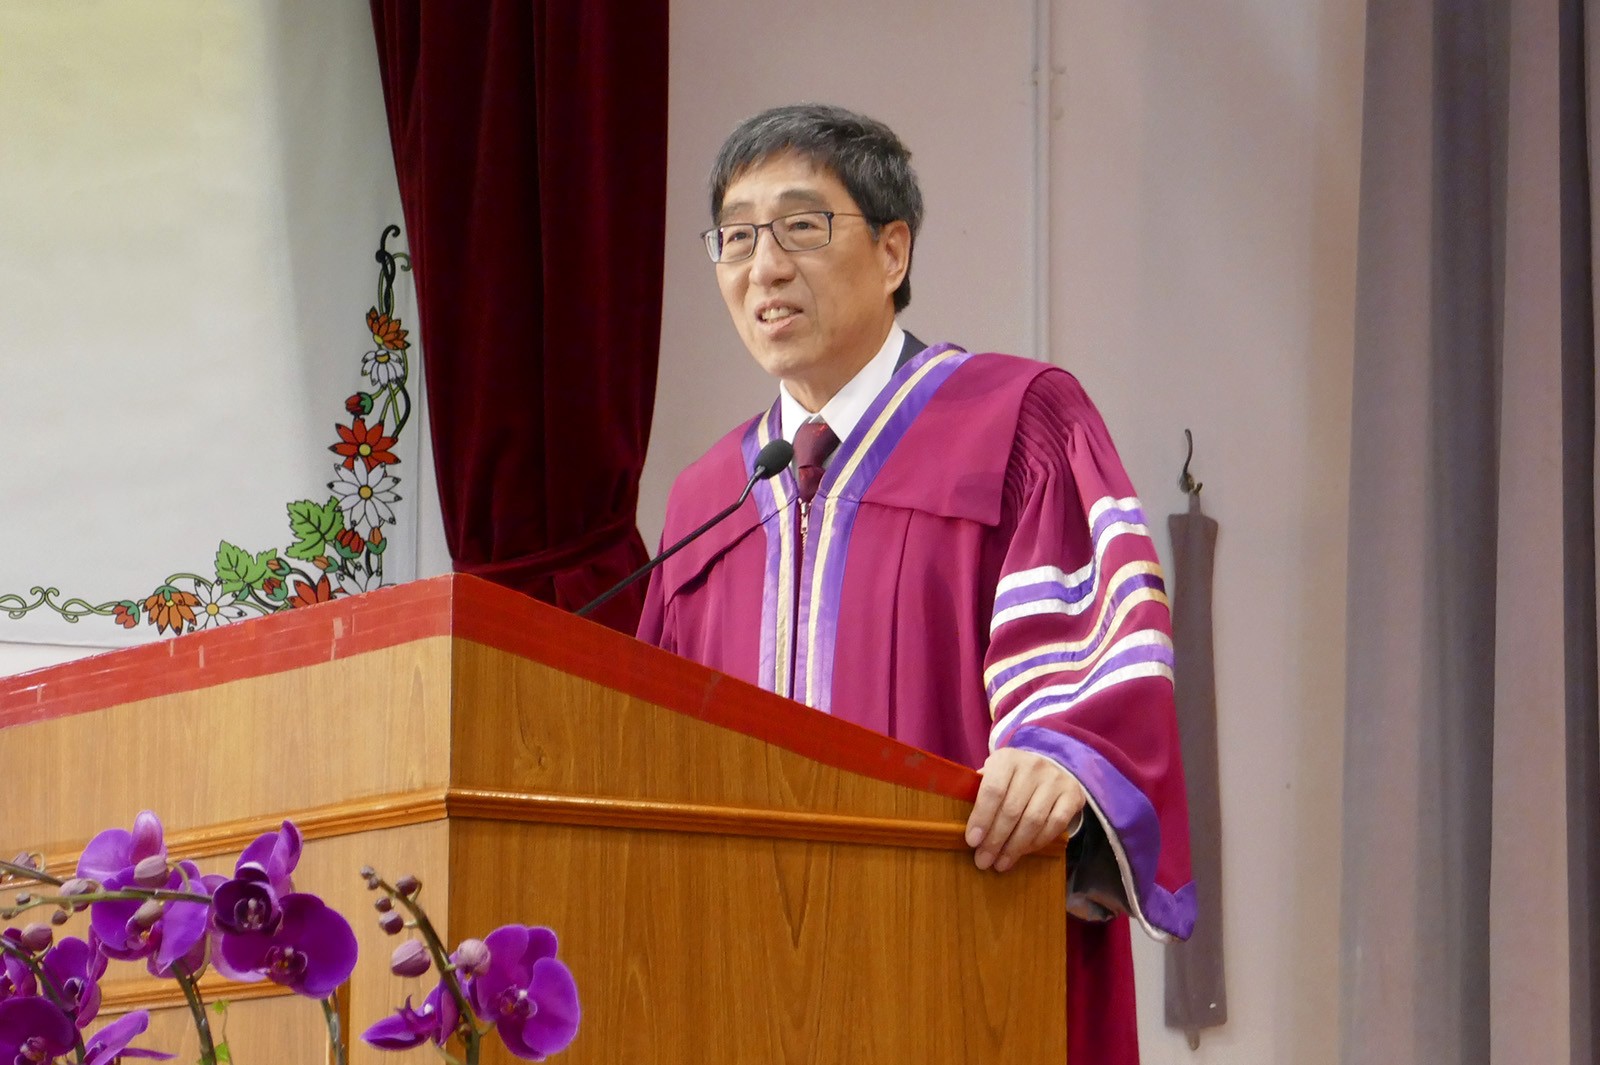 Professor Kuo delivers an address during speech day at a local secondary school. 